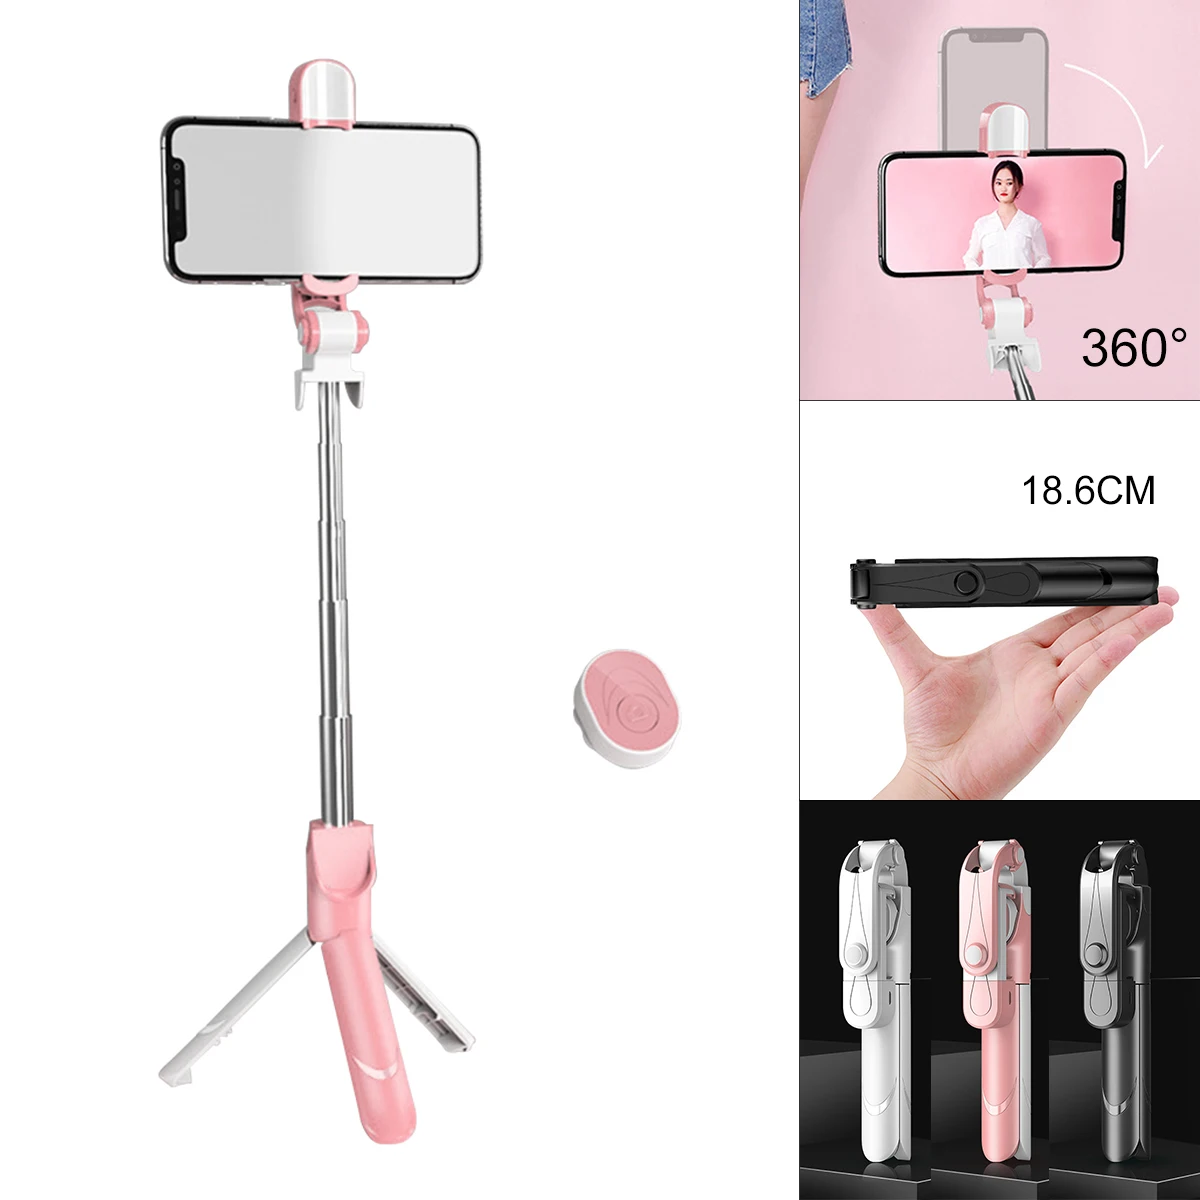 

Mobile Phone Telescopic Selfie Stick with Fill Light Phone Holder Tripod Handheld Gimbal Fit for Live / Vlog / Video